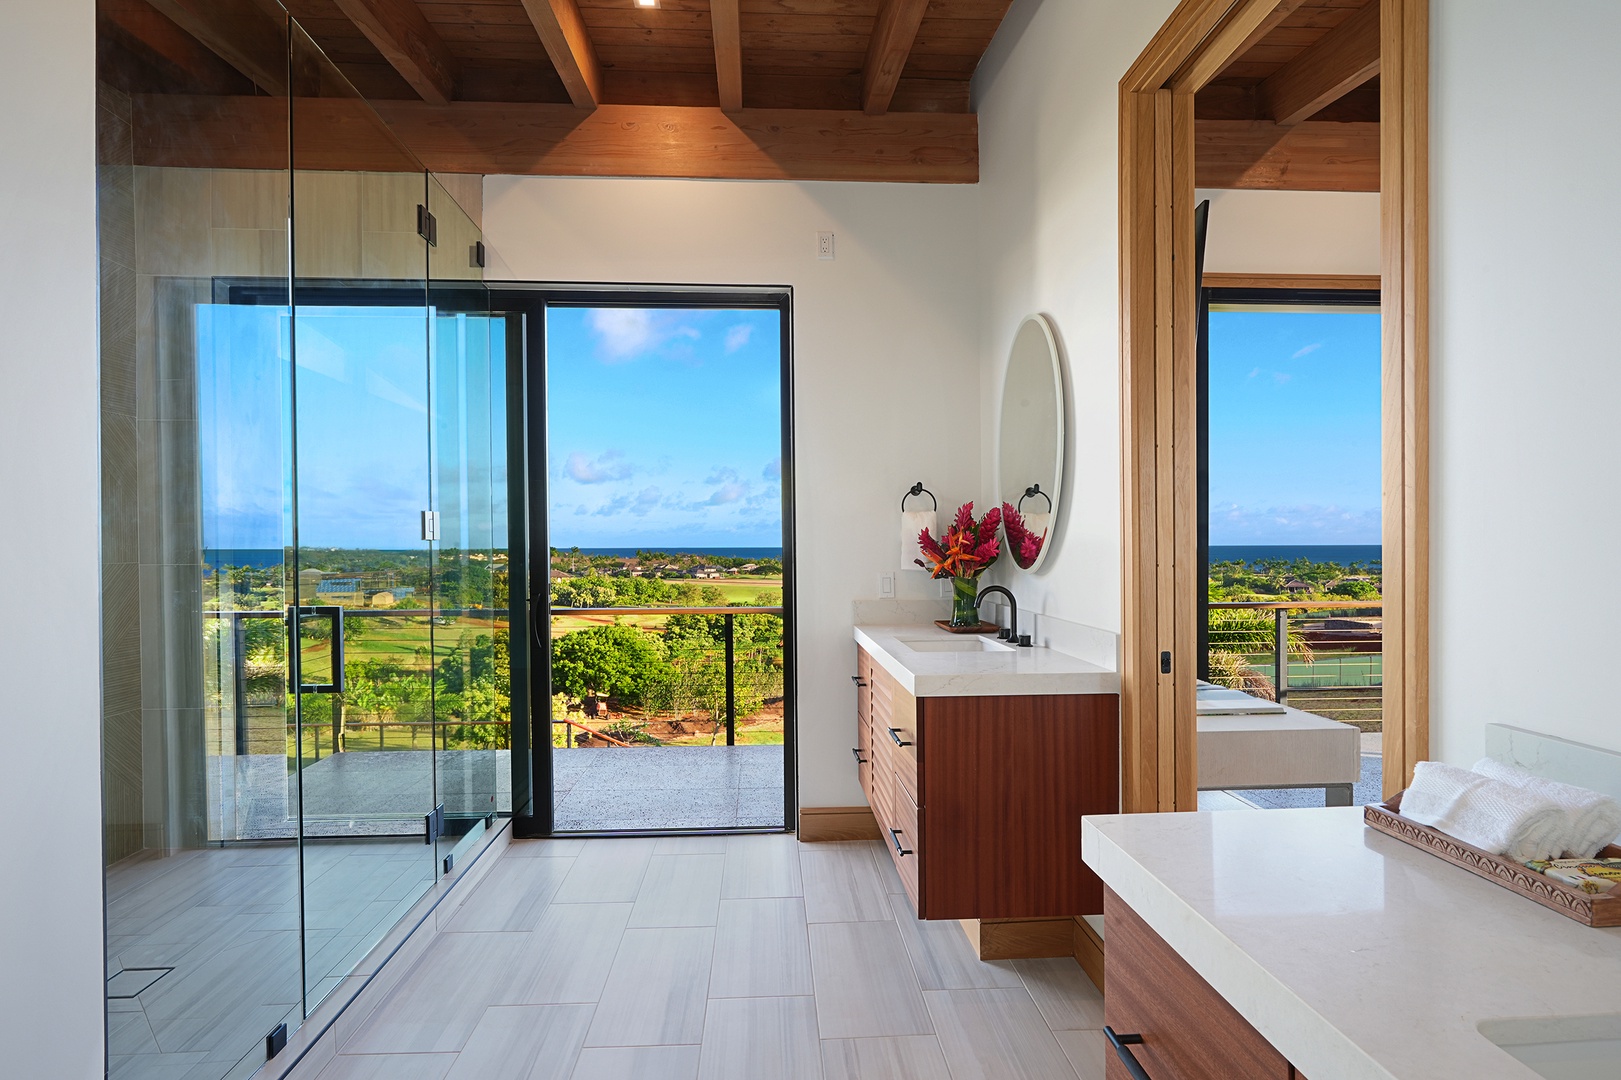 Koloa Vacation Rentals, Hale Keaka at Kukui'ula - Refresh in this airy Ohana ensuite, where sleek lines meet stunning vistas, and every detail caters to a luxurious, rejuvenating experience.